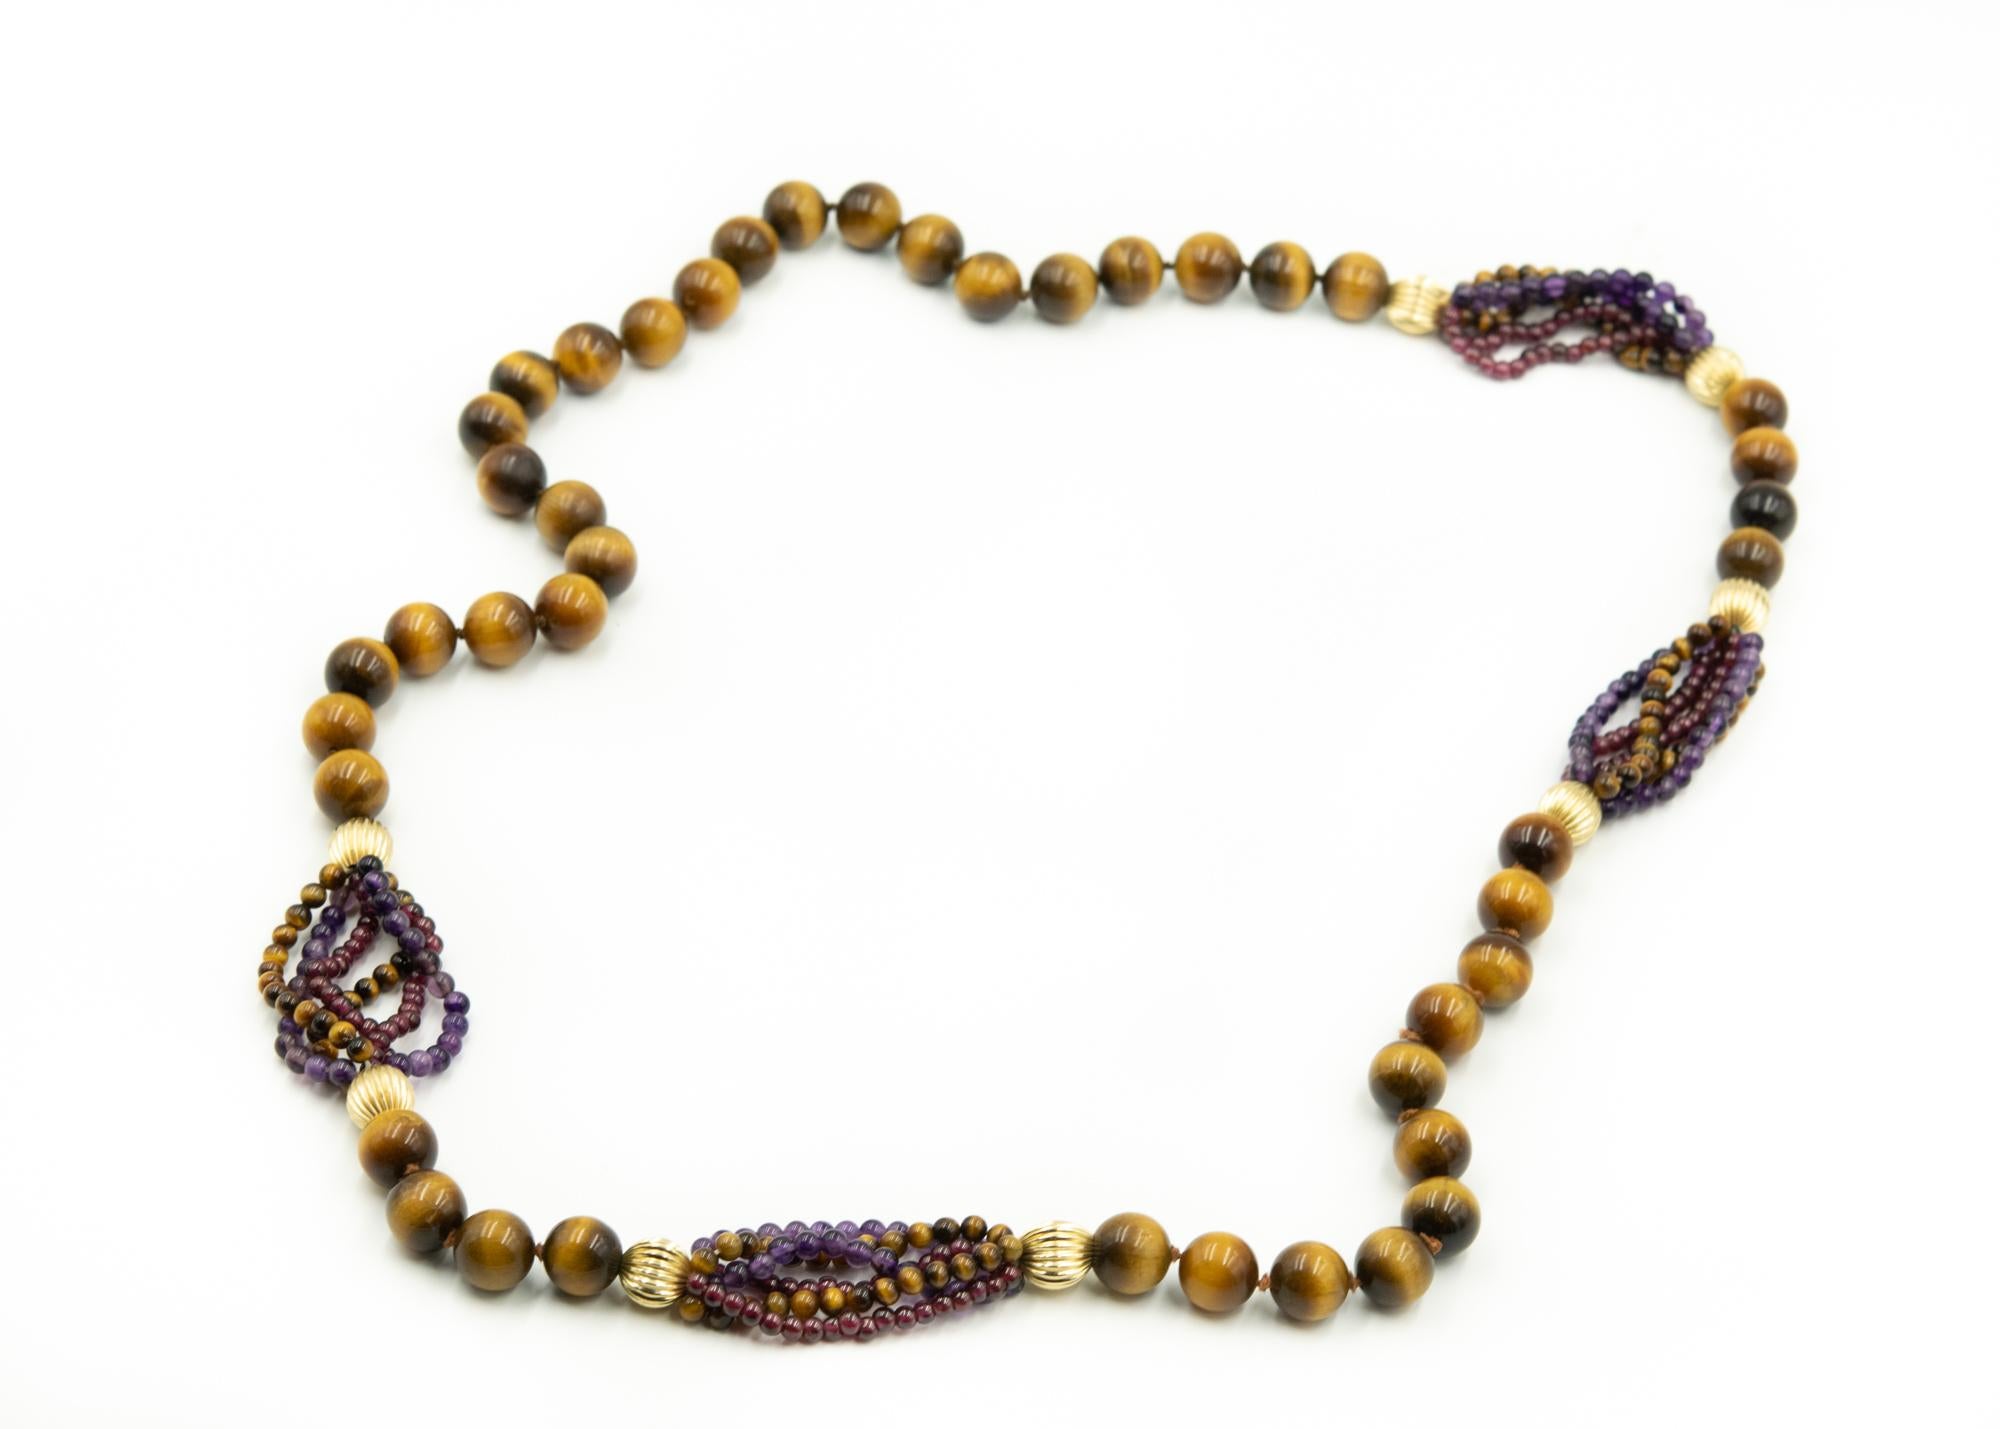 Women's or Men's Long Tiger's Eye Amethyst and Garnet Bead Necklace with Gold Filled Ribbed Beads For Sale